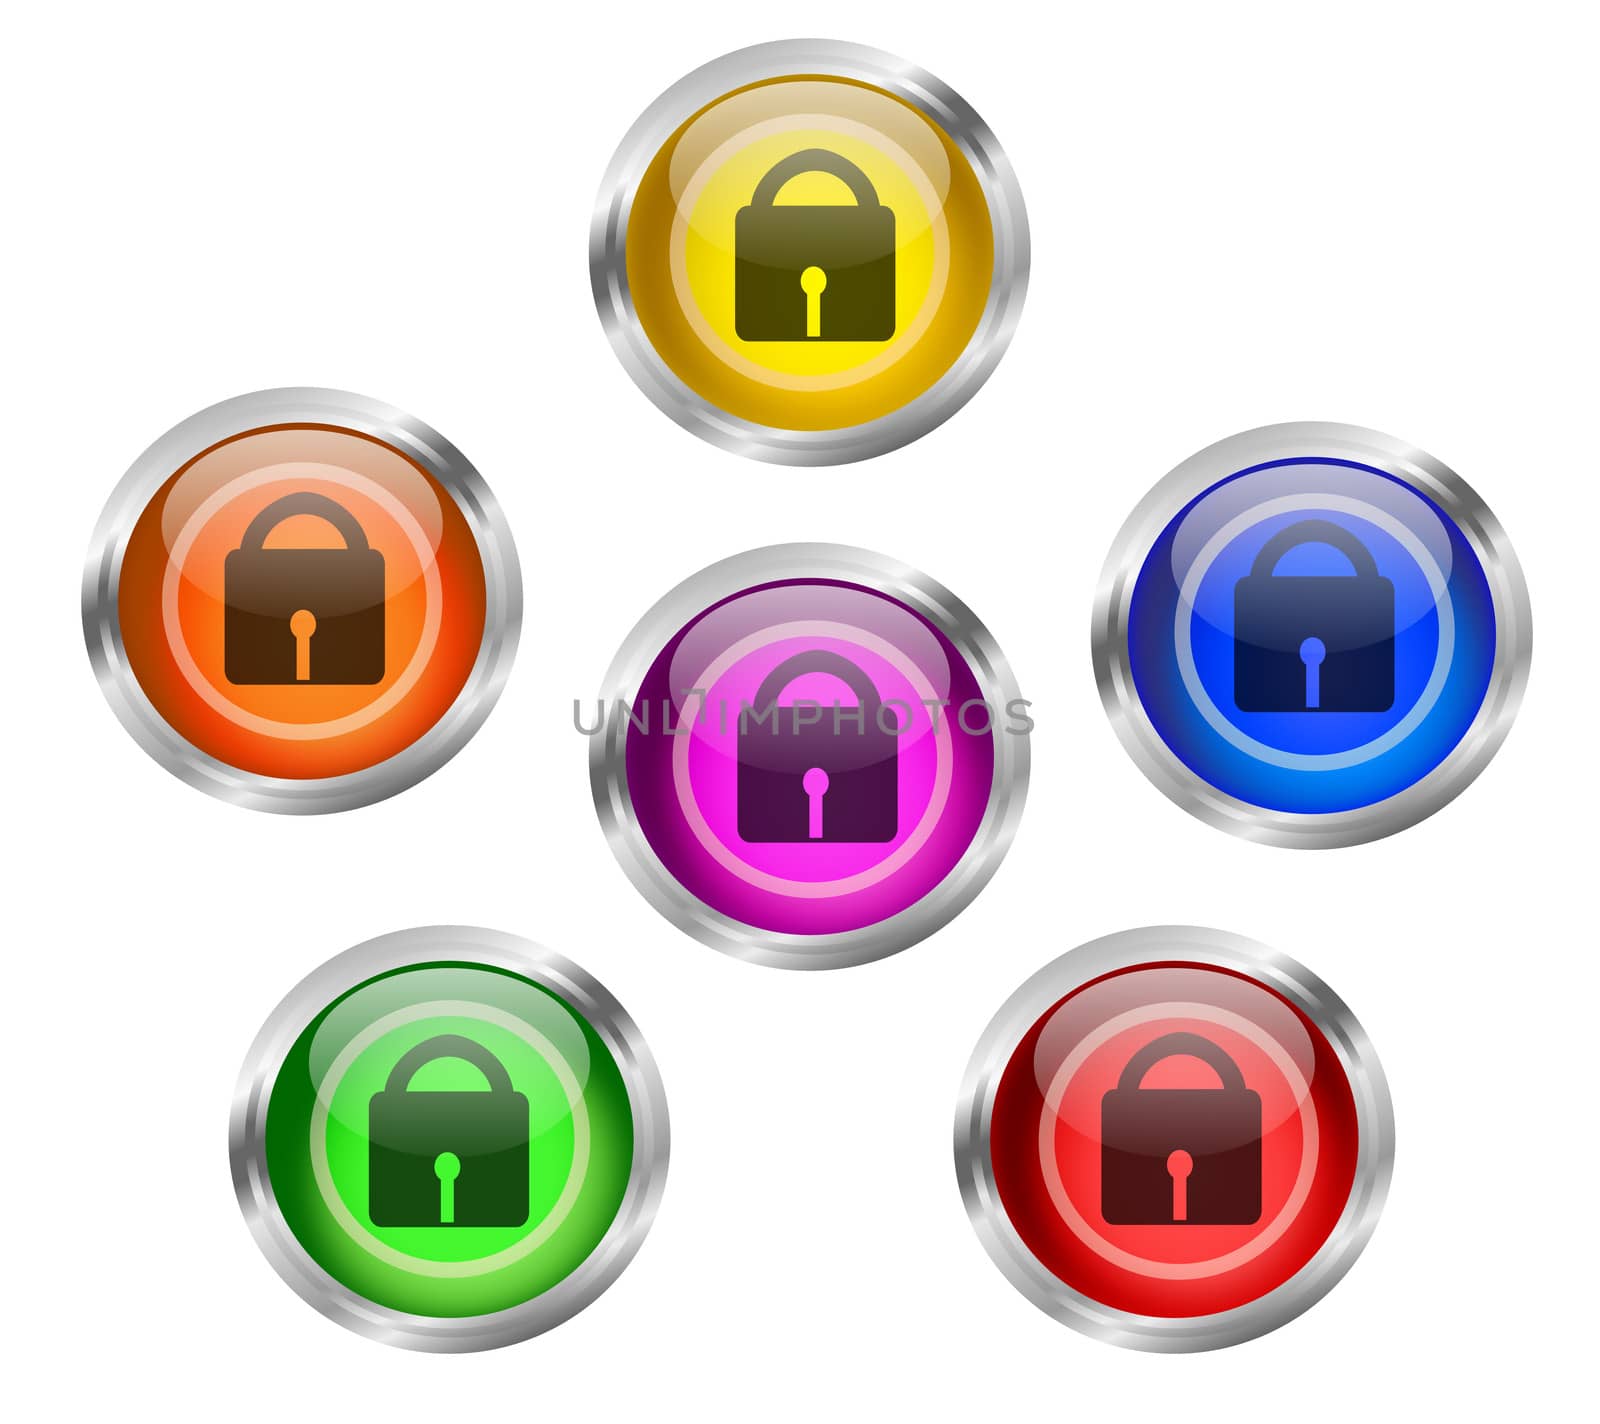 Set of shiny web buttons with security pad lock icon in six different colors
